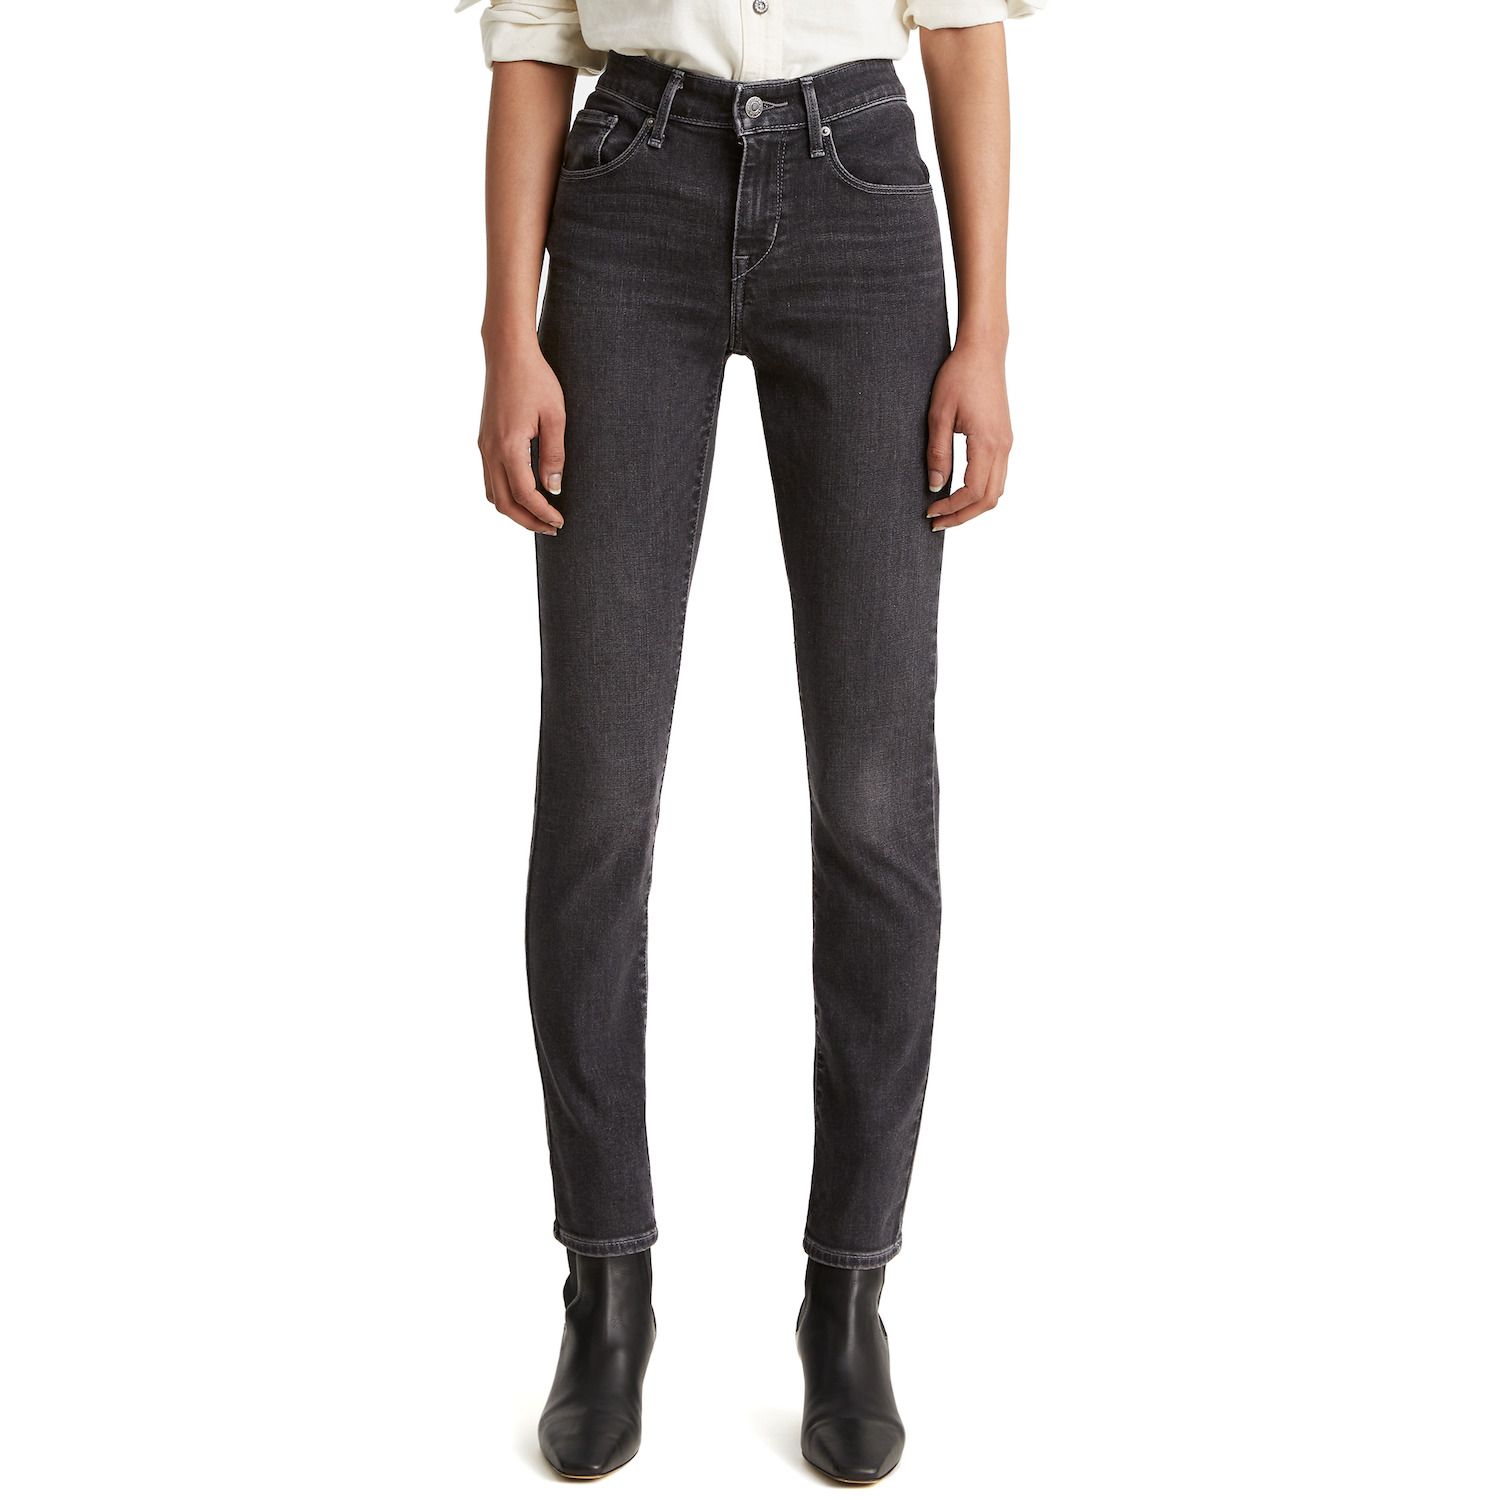 Image for Levi's Women's Classic Skinny Jeans at Kohl's.